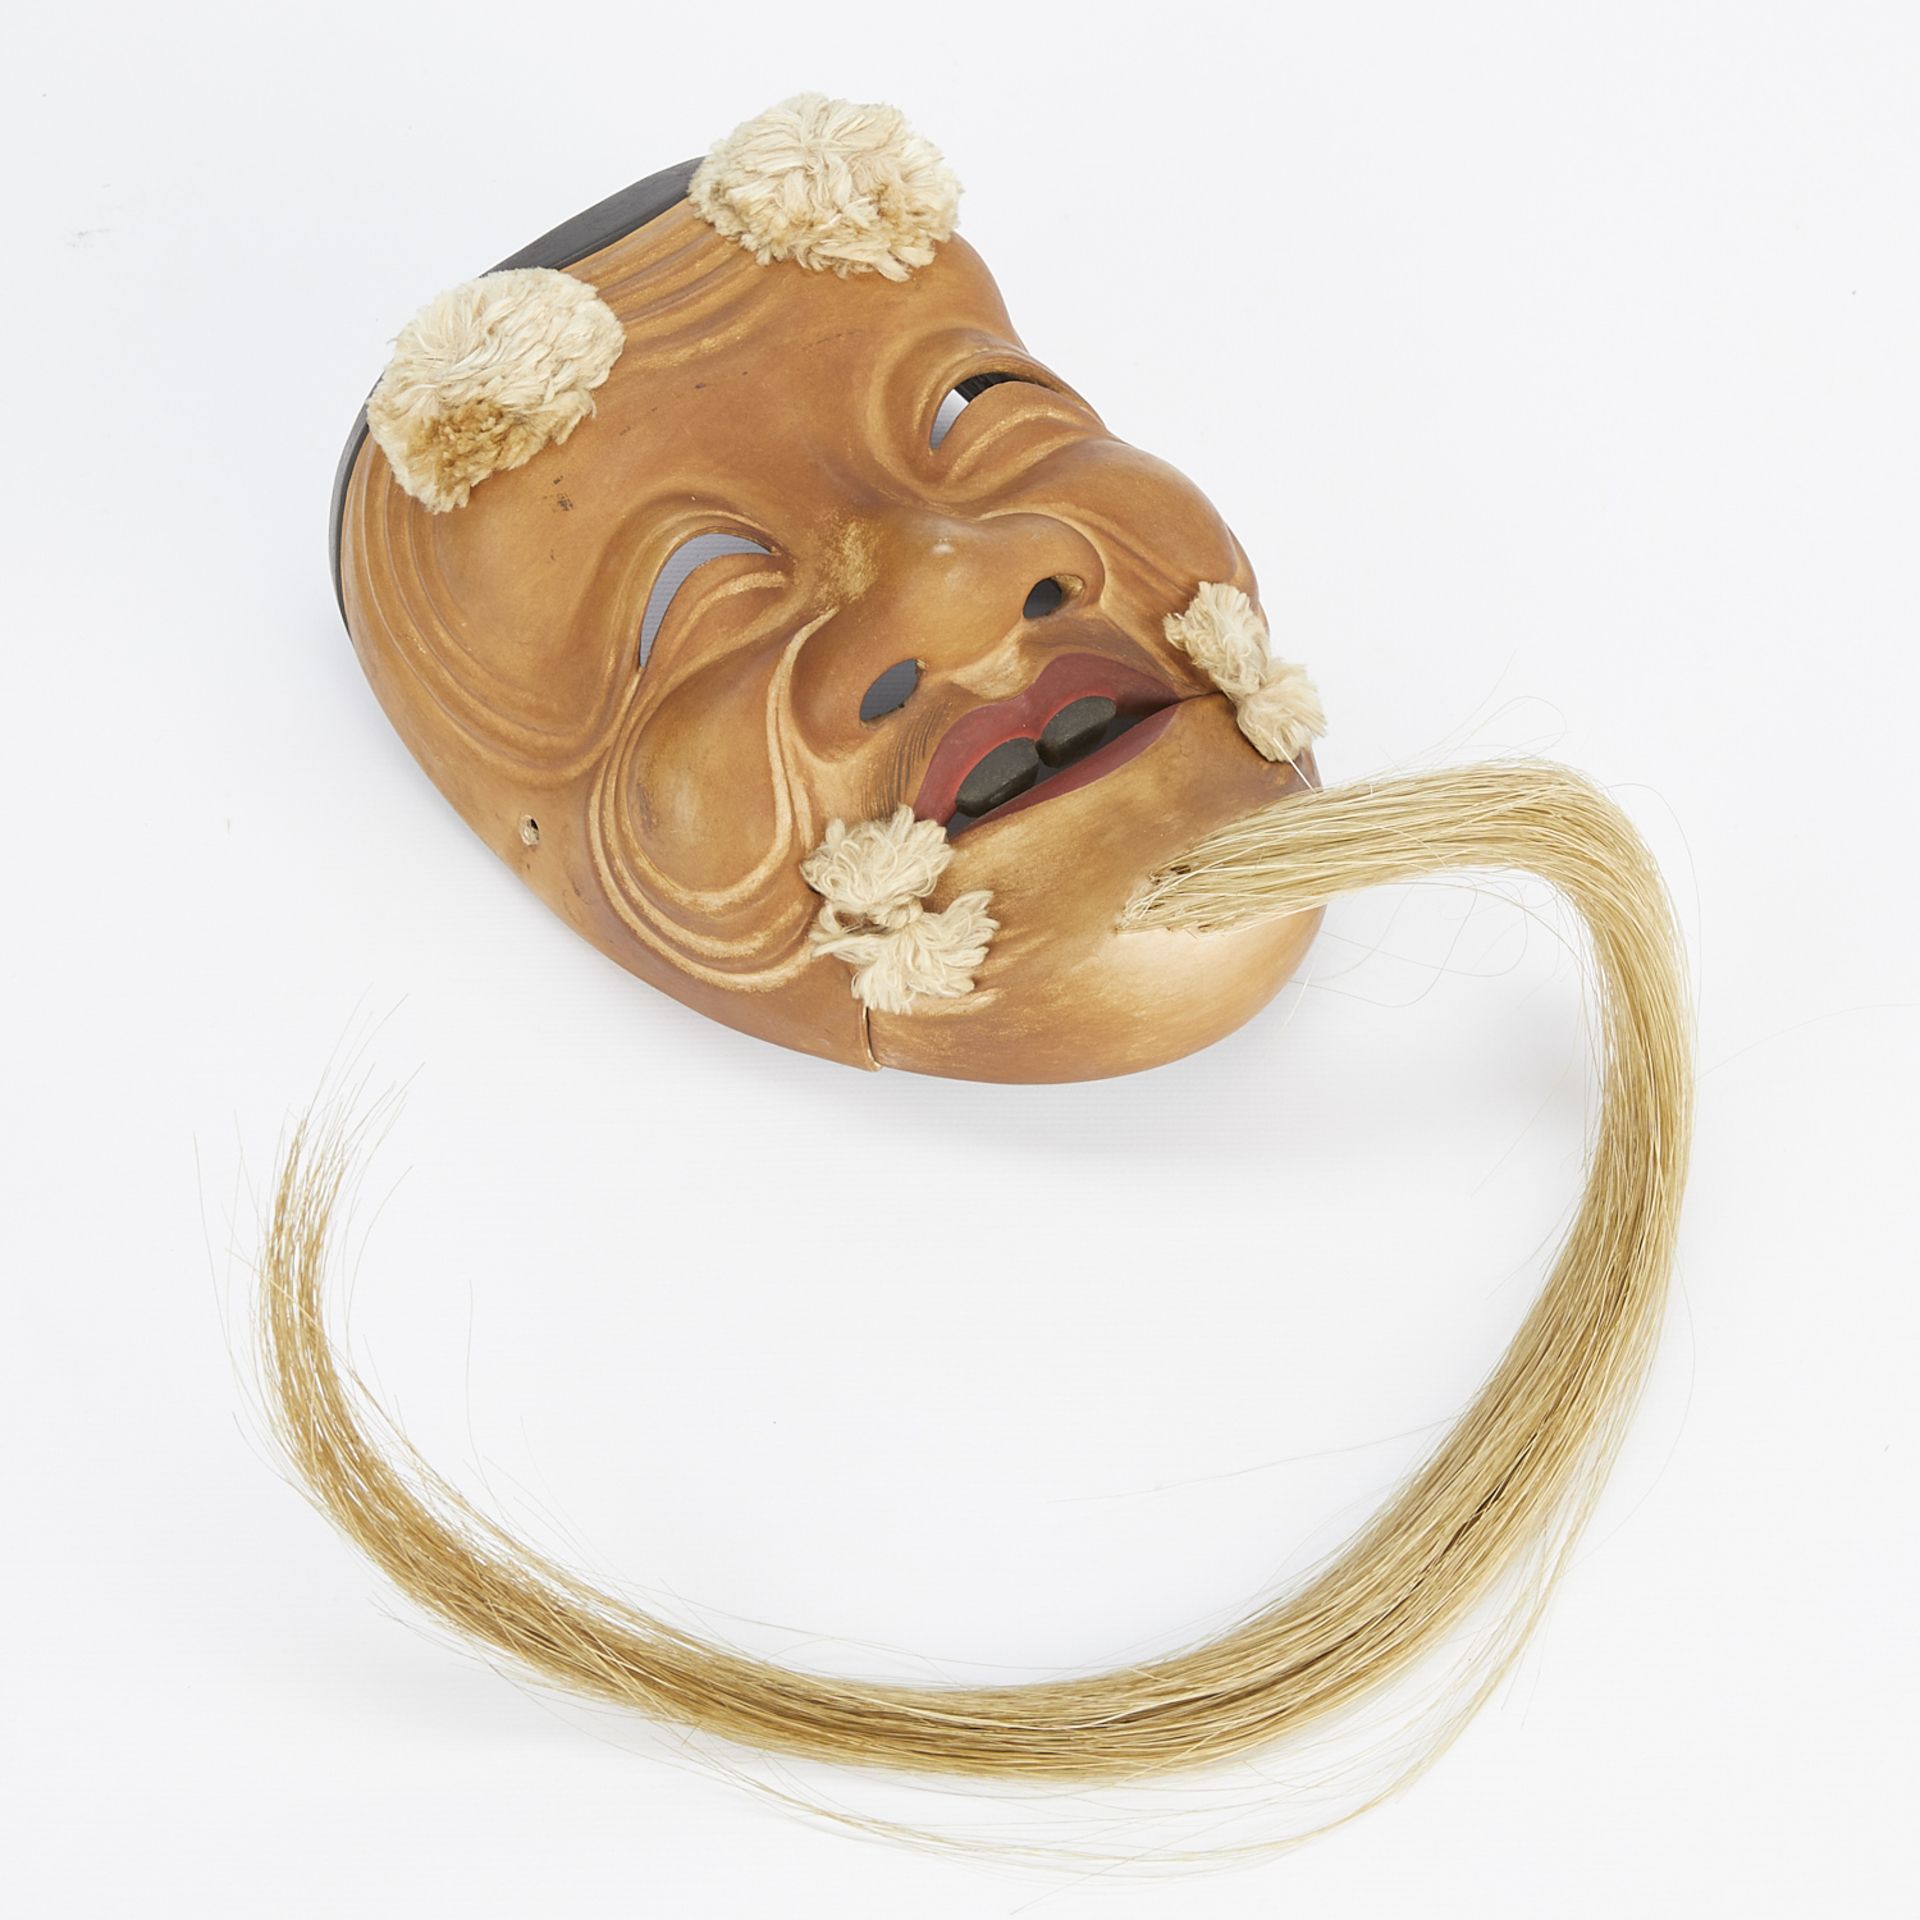 Kano Tessai Carved Wood Noh Mask - Image 7 of 15